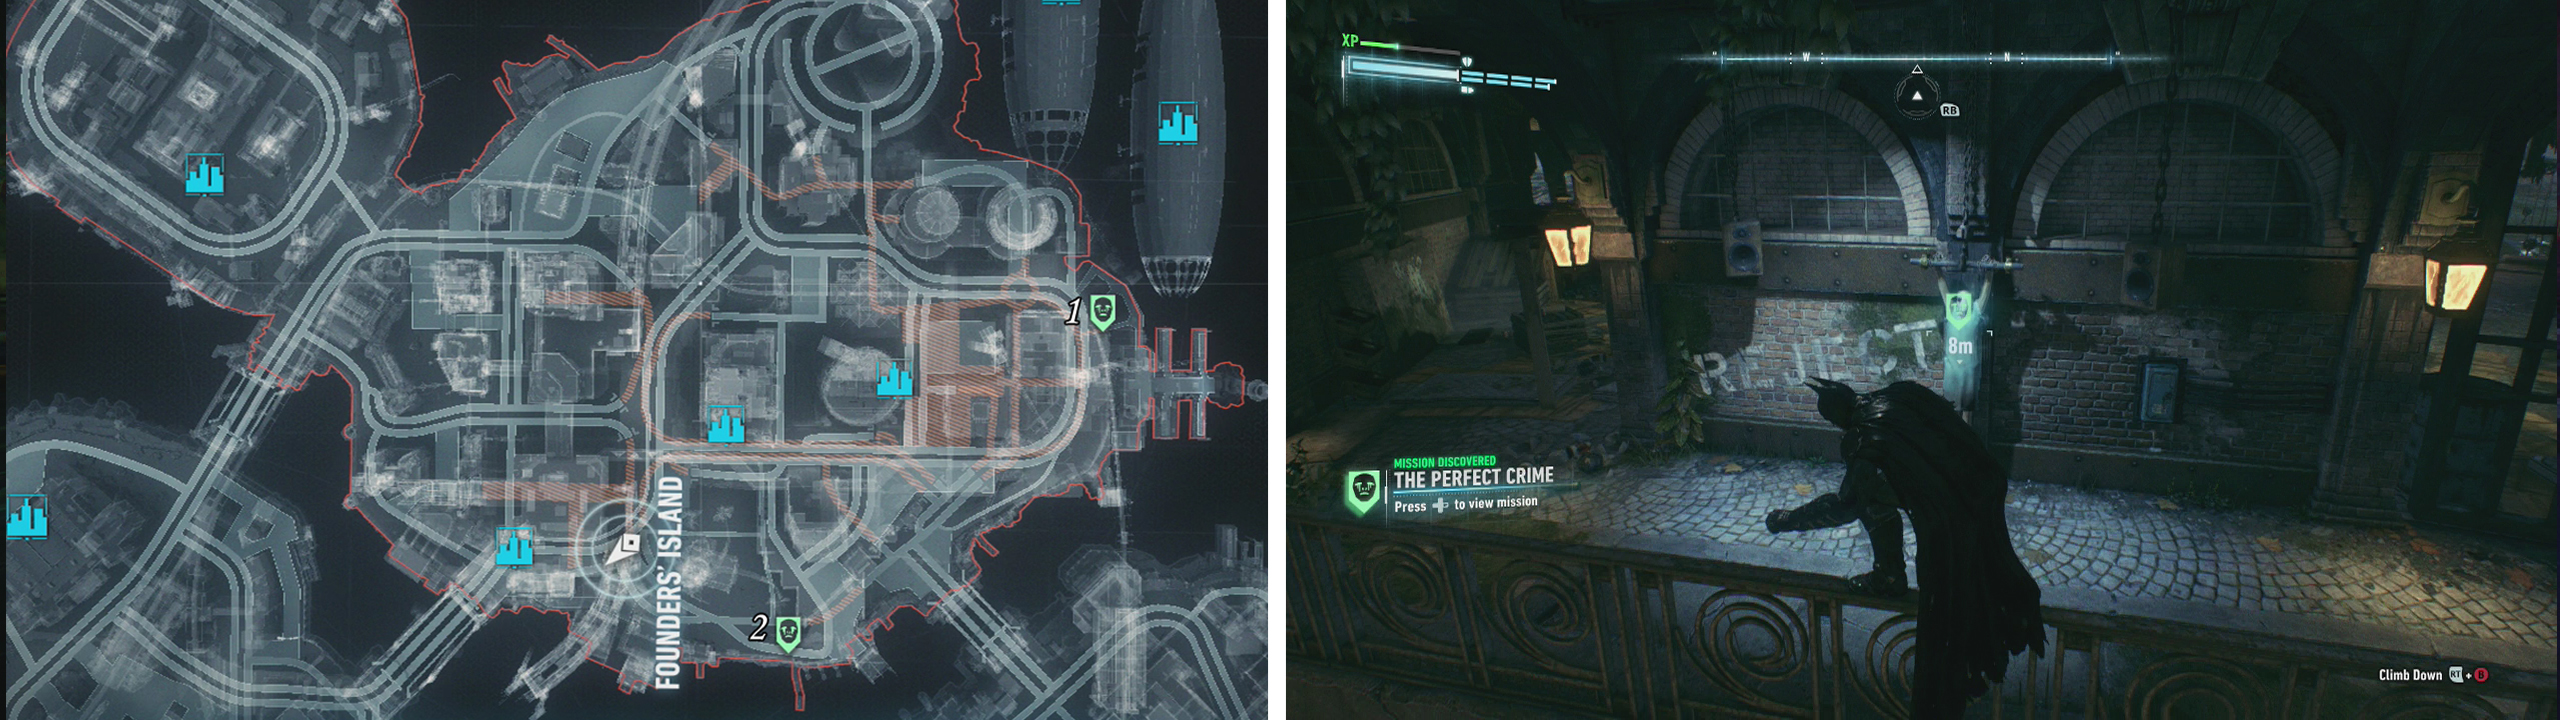 The bodies on Founders Island can be found at these locations (left). The right picture shows location 1.